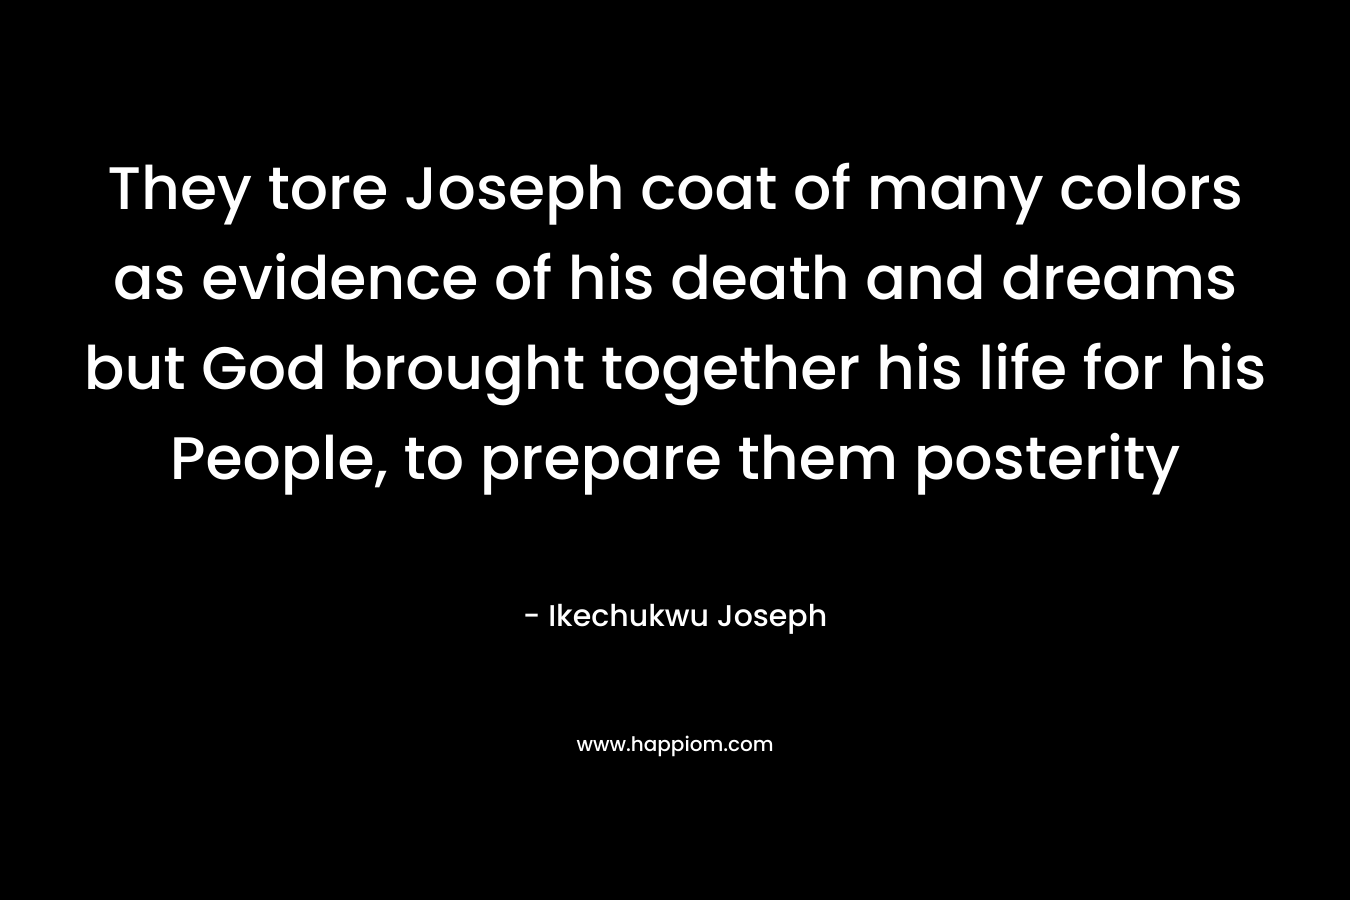 They tore Joseph coat of many colors as evidence of his death and dreams but God brought together his life for his People, to prepare them posterity – Ikechukwu Joseph